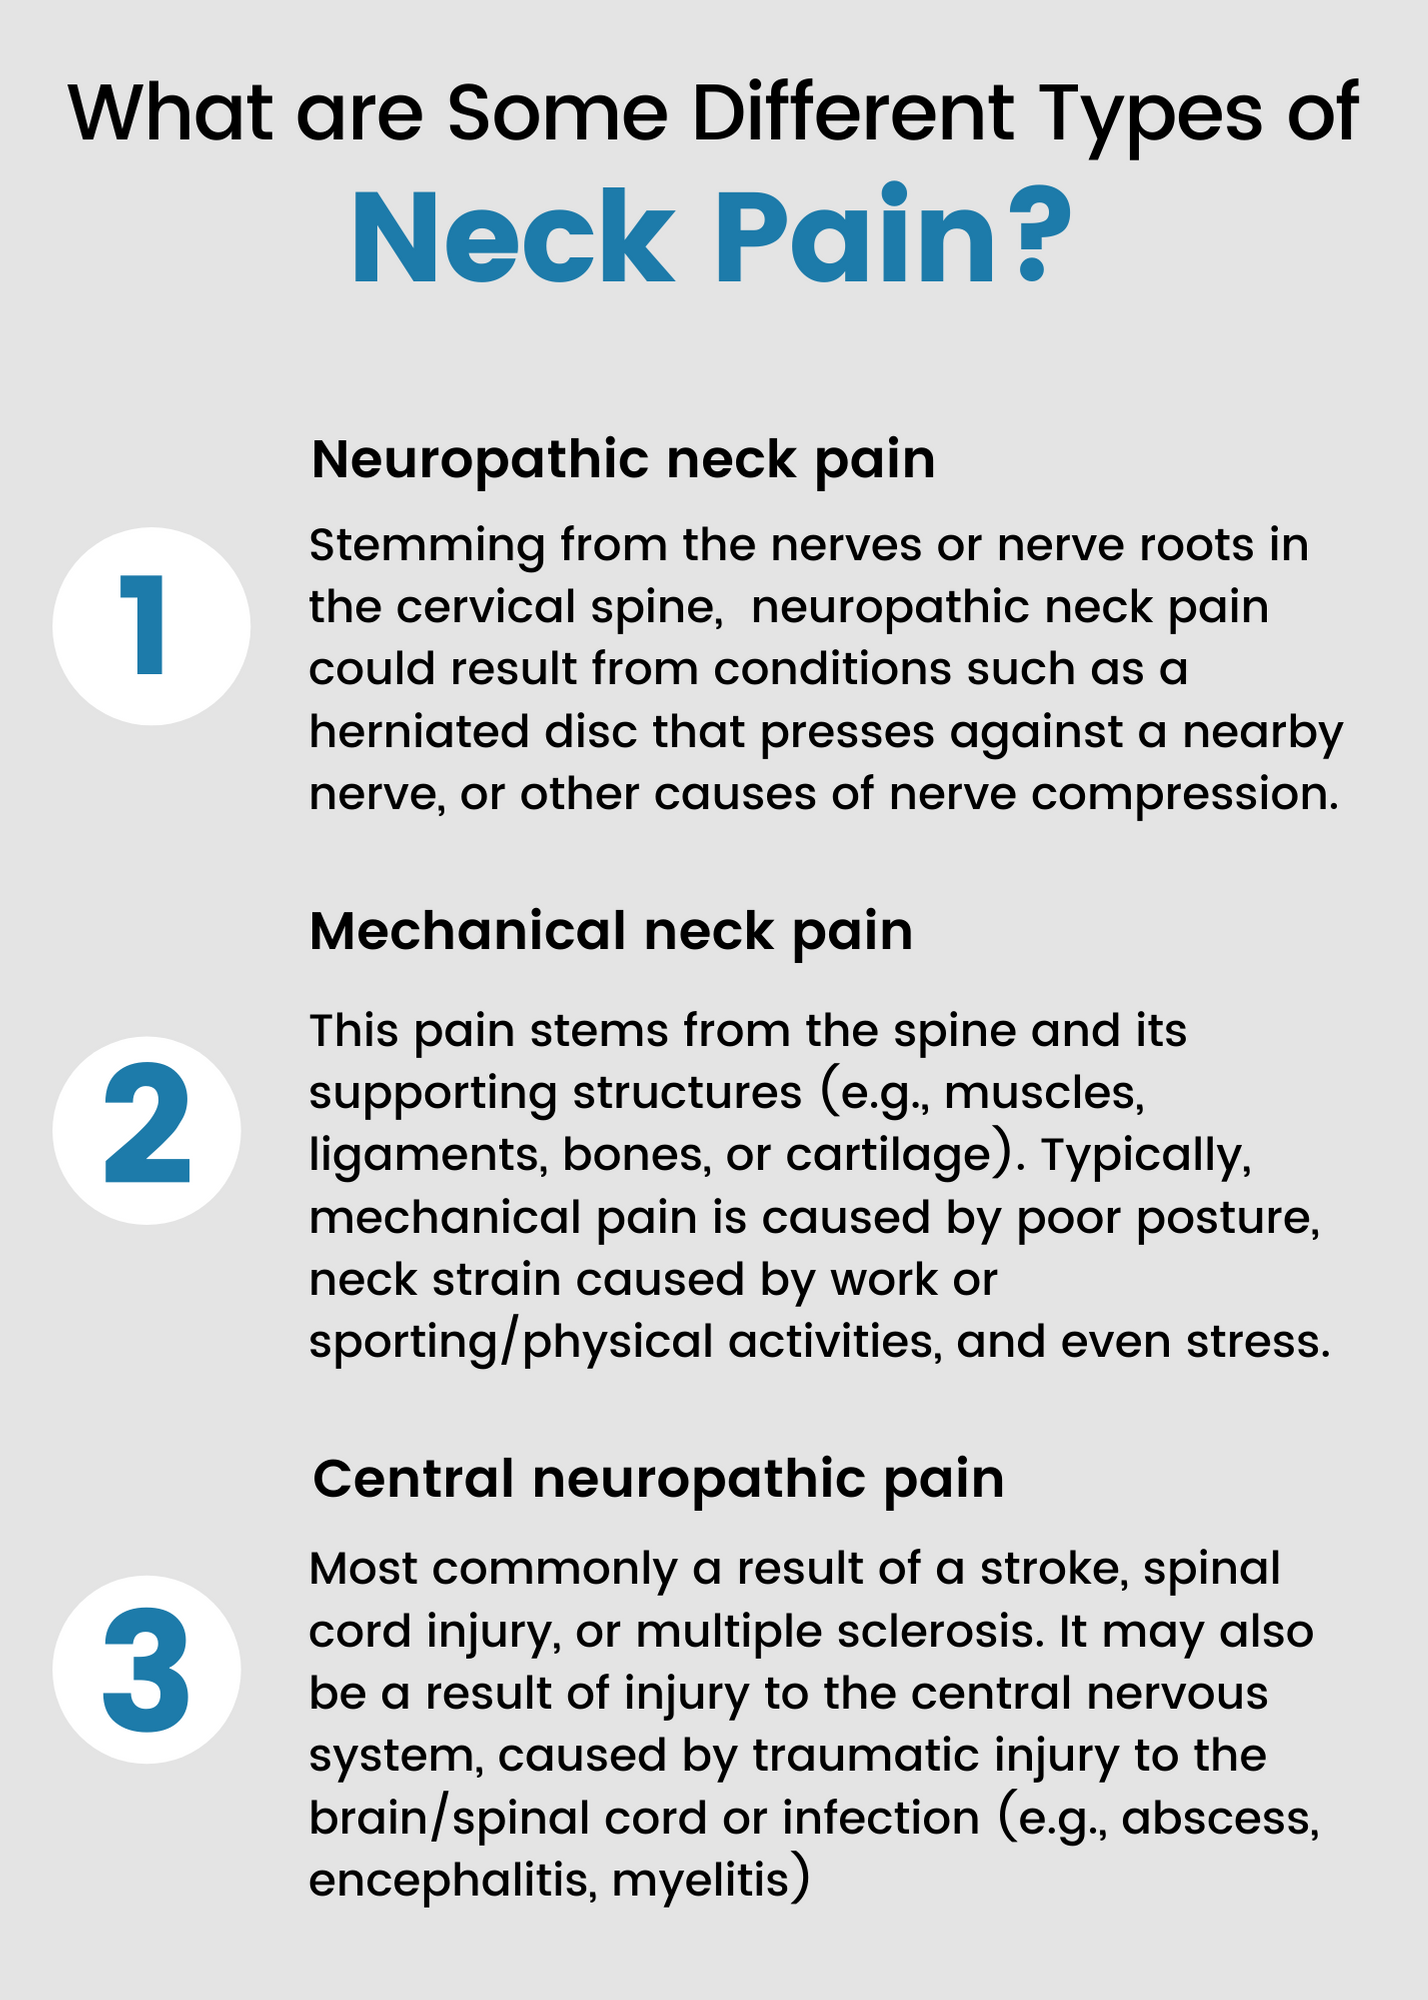 Is Neck Soreness After A Chiropractic Adjustment Normal?